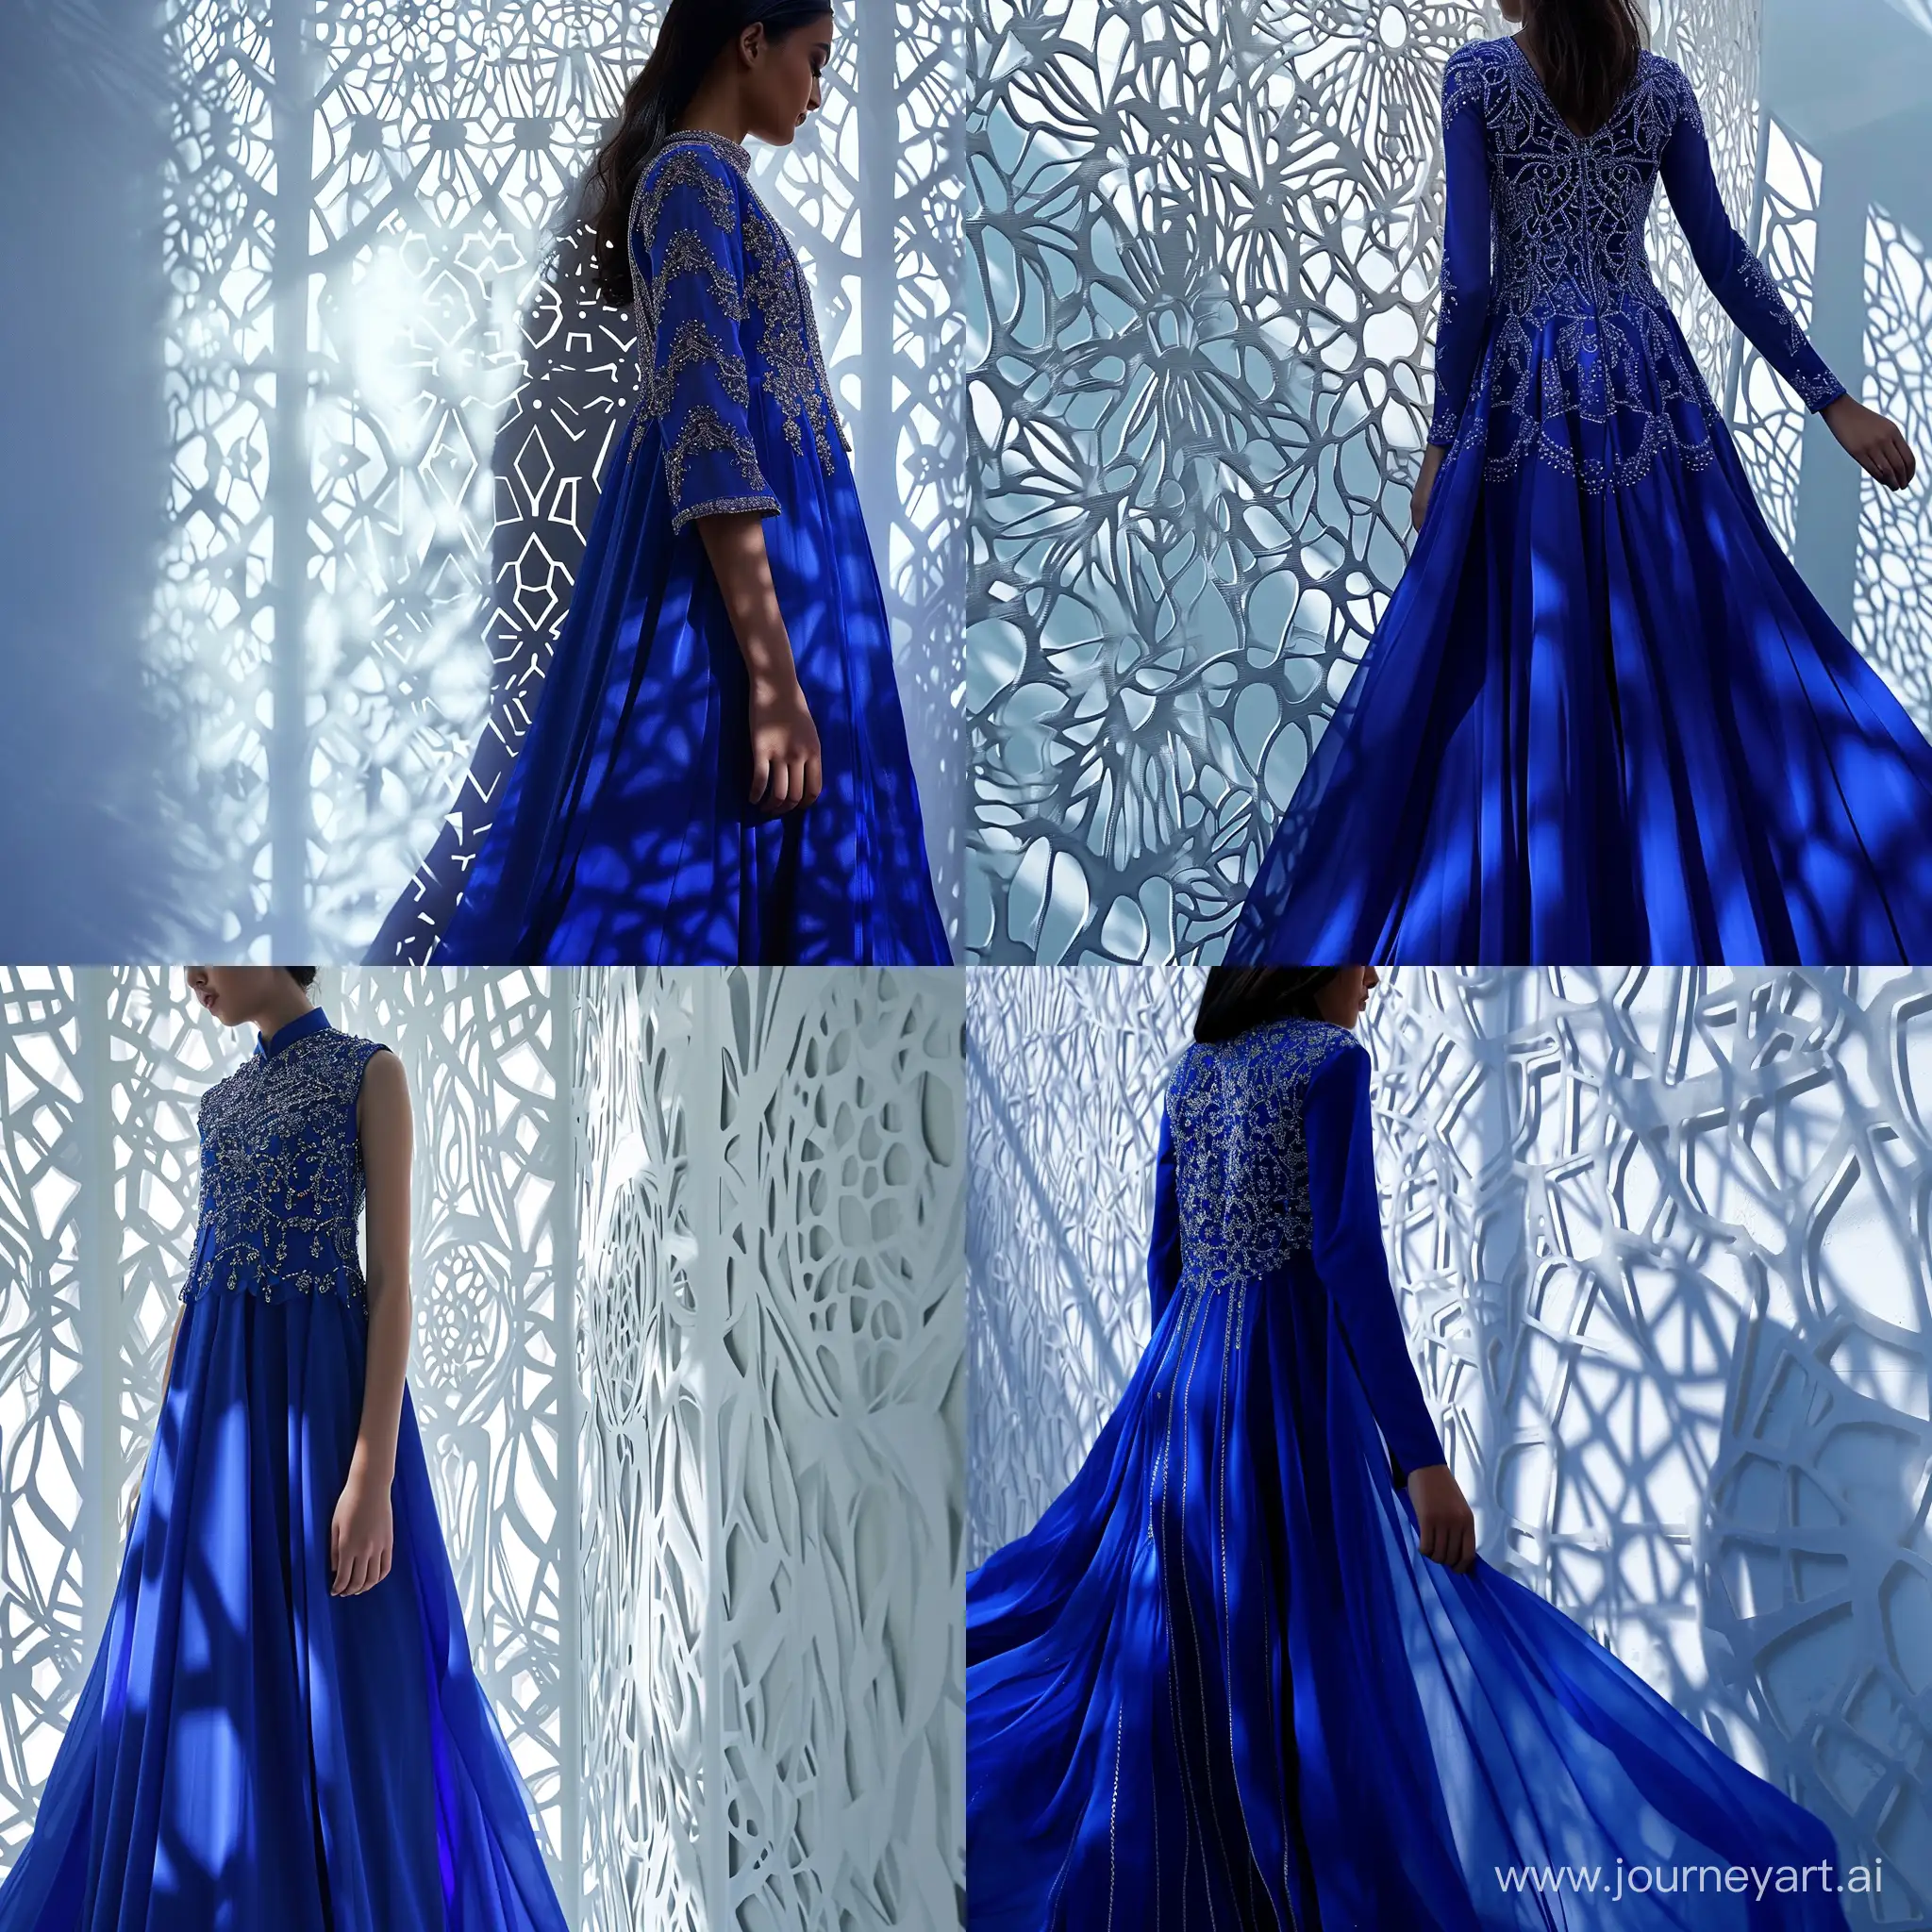 Elegant-Royal-Blue-Dress-with-Geometric-Lace-Wall-Background